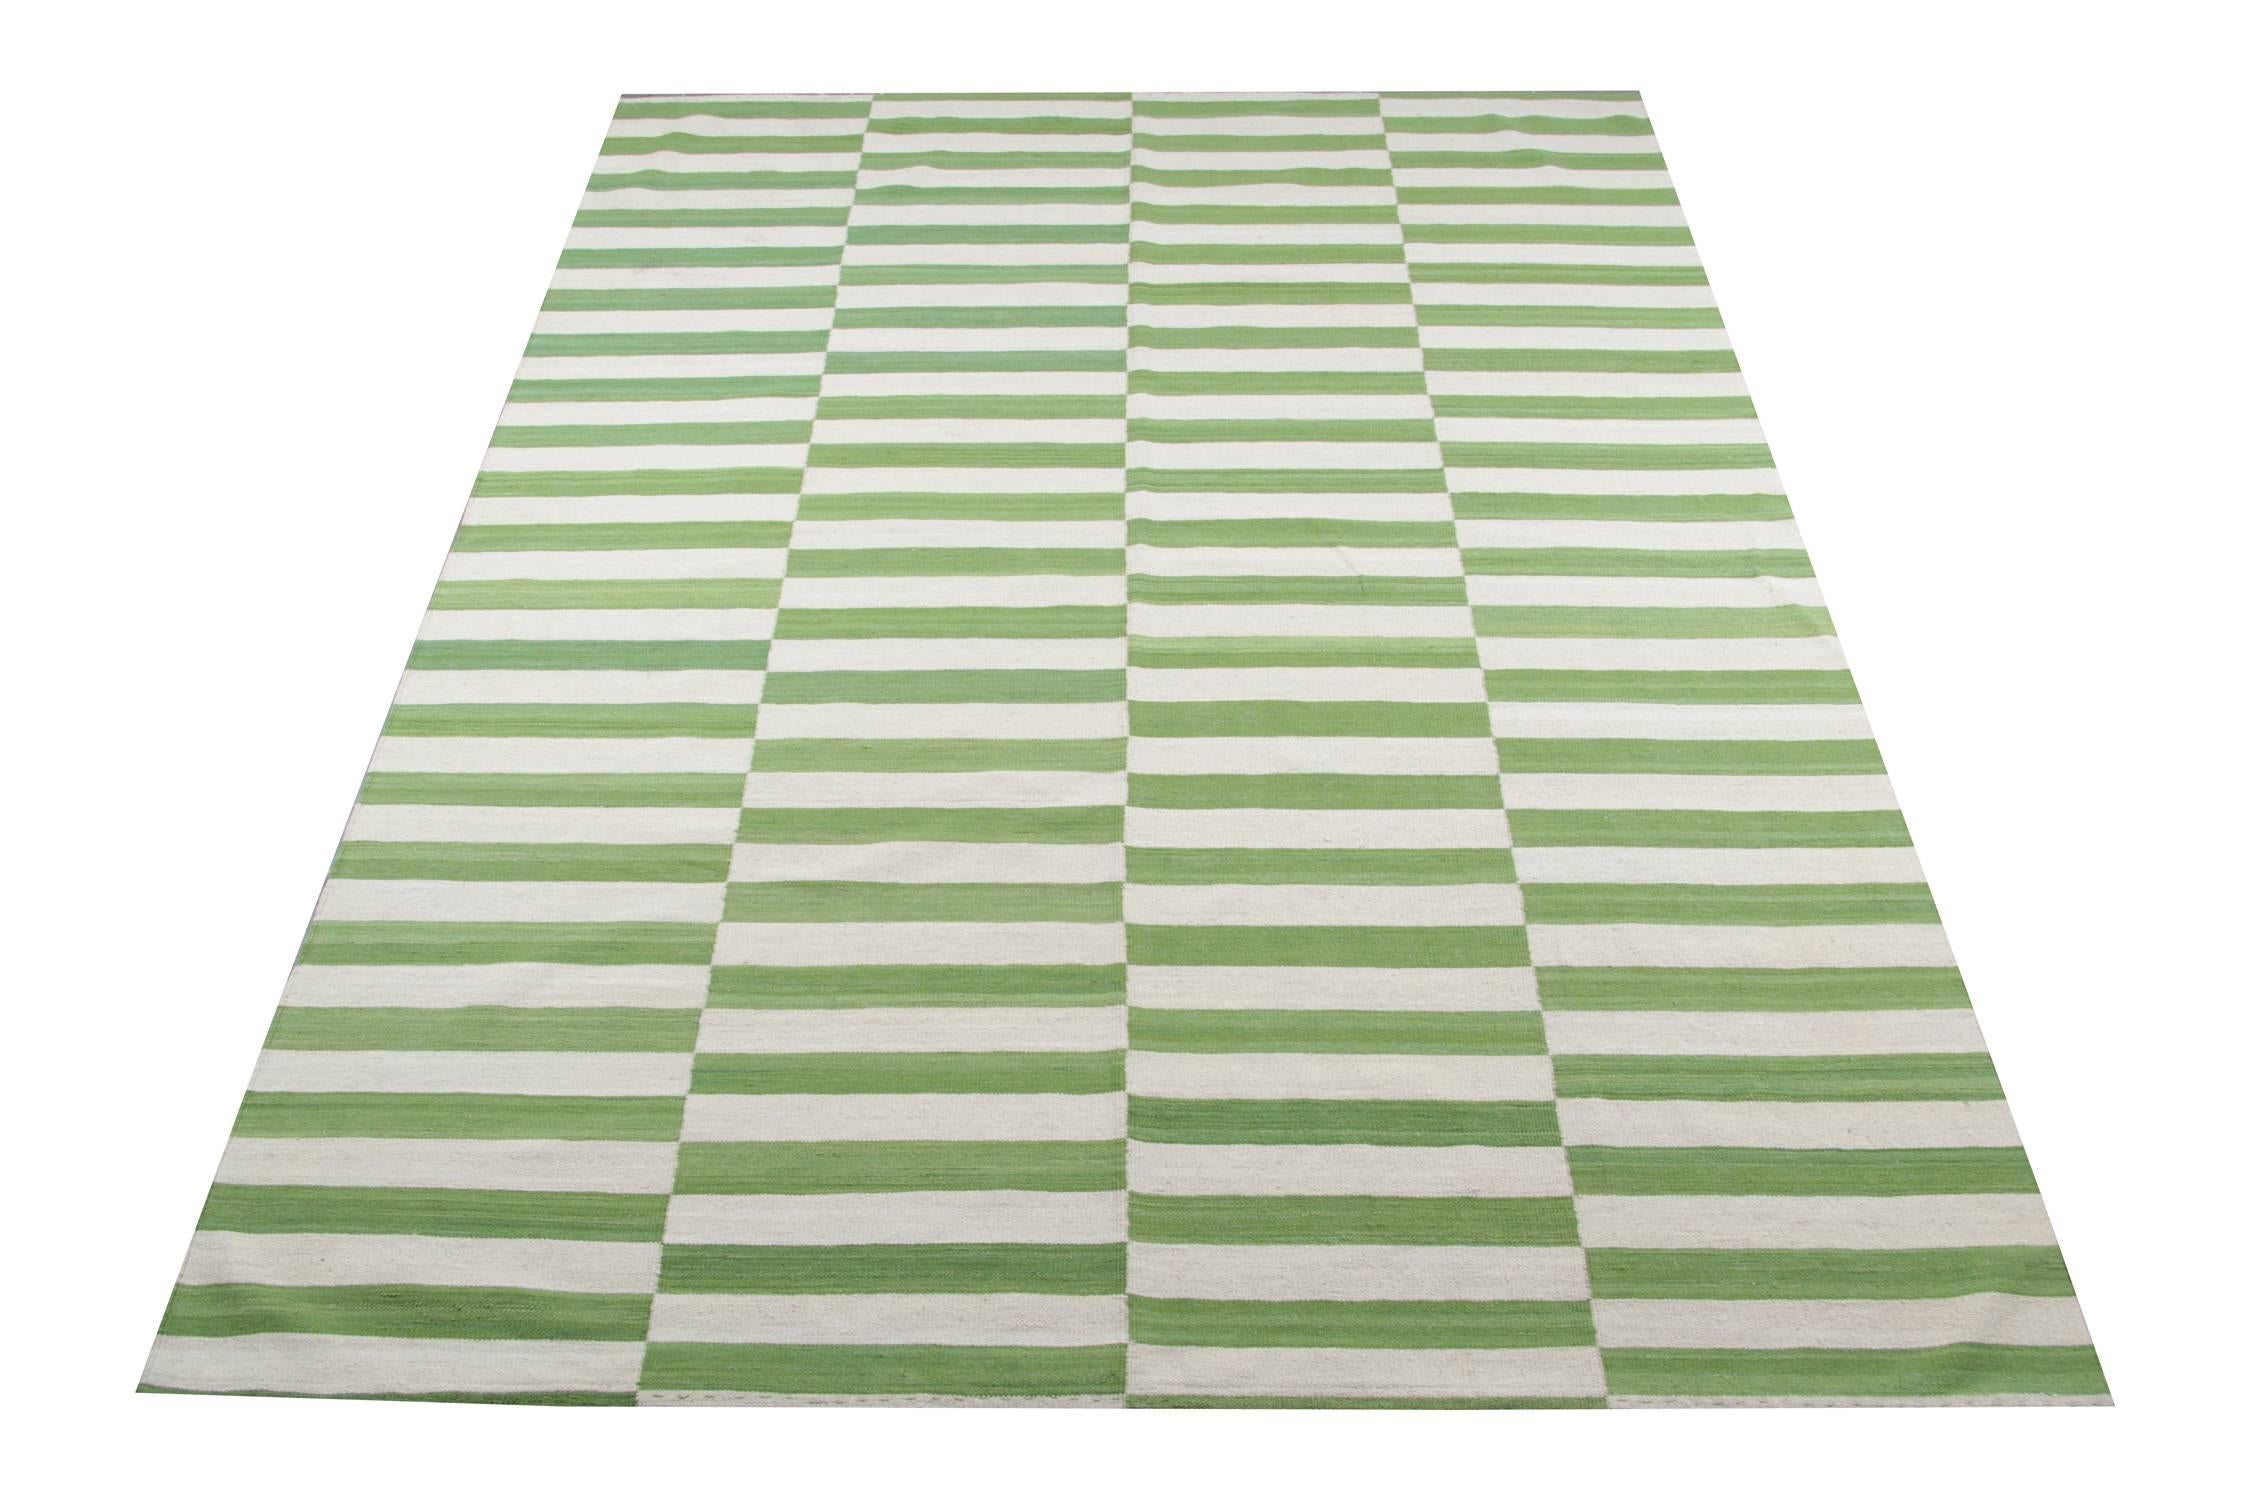 This striped rug is 100% handmade in Afghanistan. Kilim rugs are flat woven and the materials used for these luxury rugs are wool and cotton.  Only organic dyes were used for these handmade rugs. This green rug is hard-wearing and therefore will